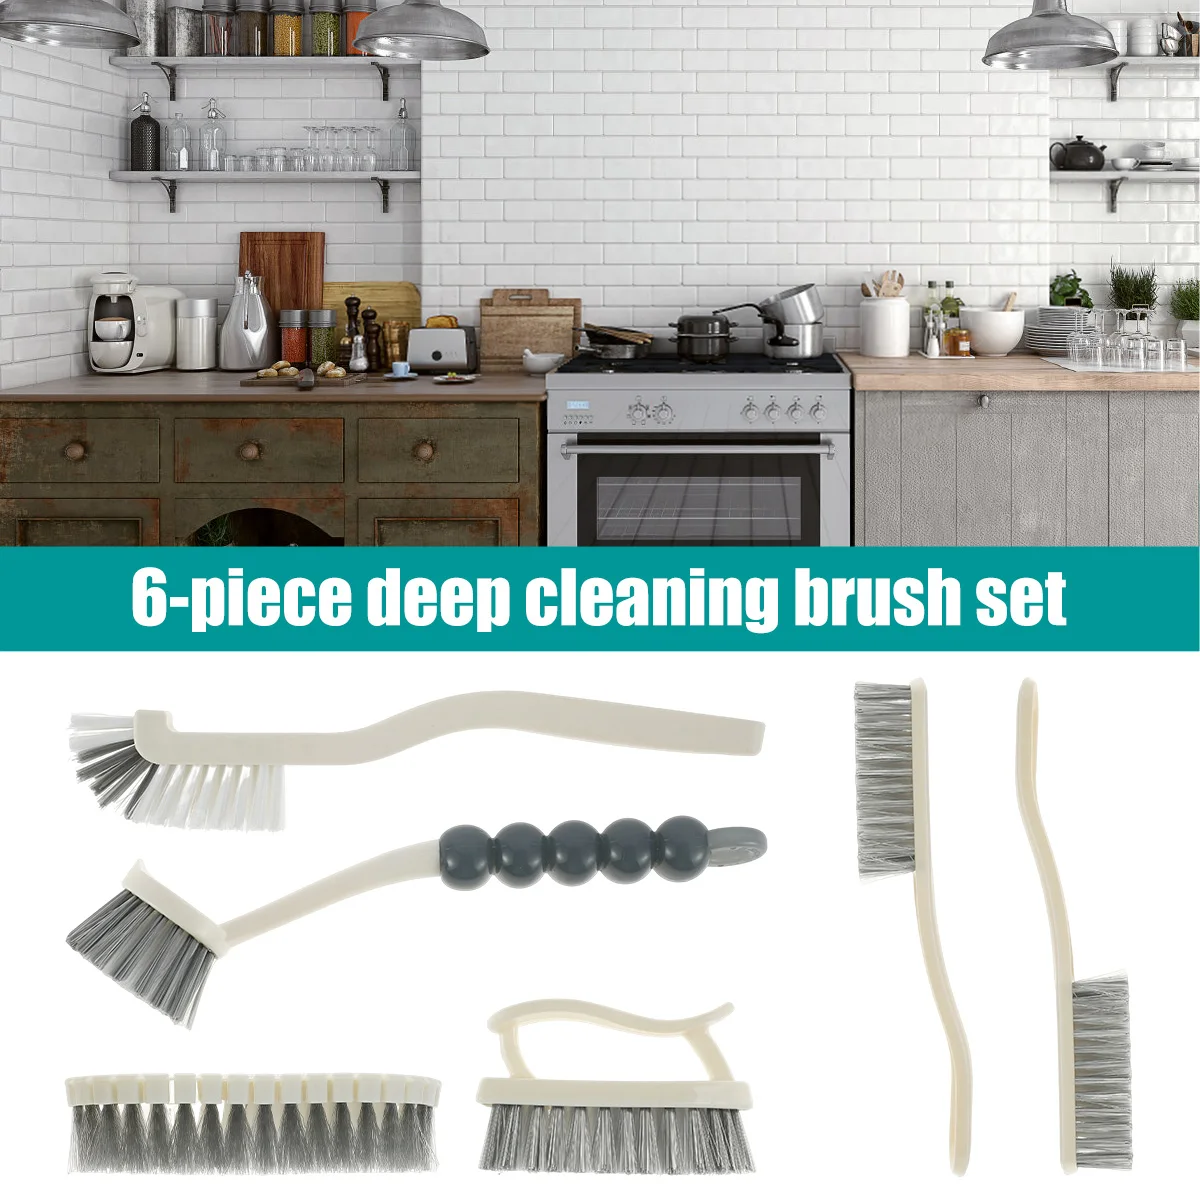 https://ae01.alicdn.com/kf/S3714a217b67d44f1a8e2d27774b79340b/6Pcs-Deep-Cleaning-Brushes-Set-Complete-Scrub-Brush-Set-Kitchen-Dish-Brush-with-Comfortable-Grip-Bendable.jpg